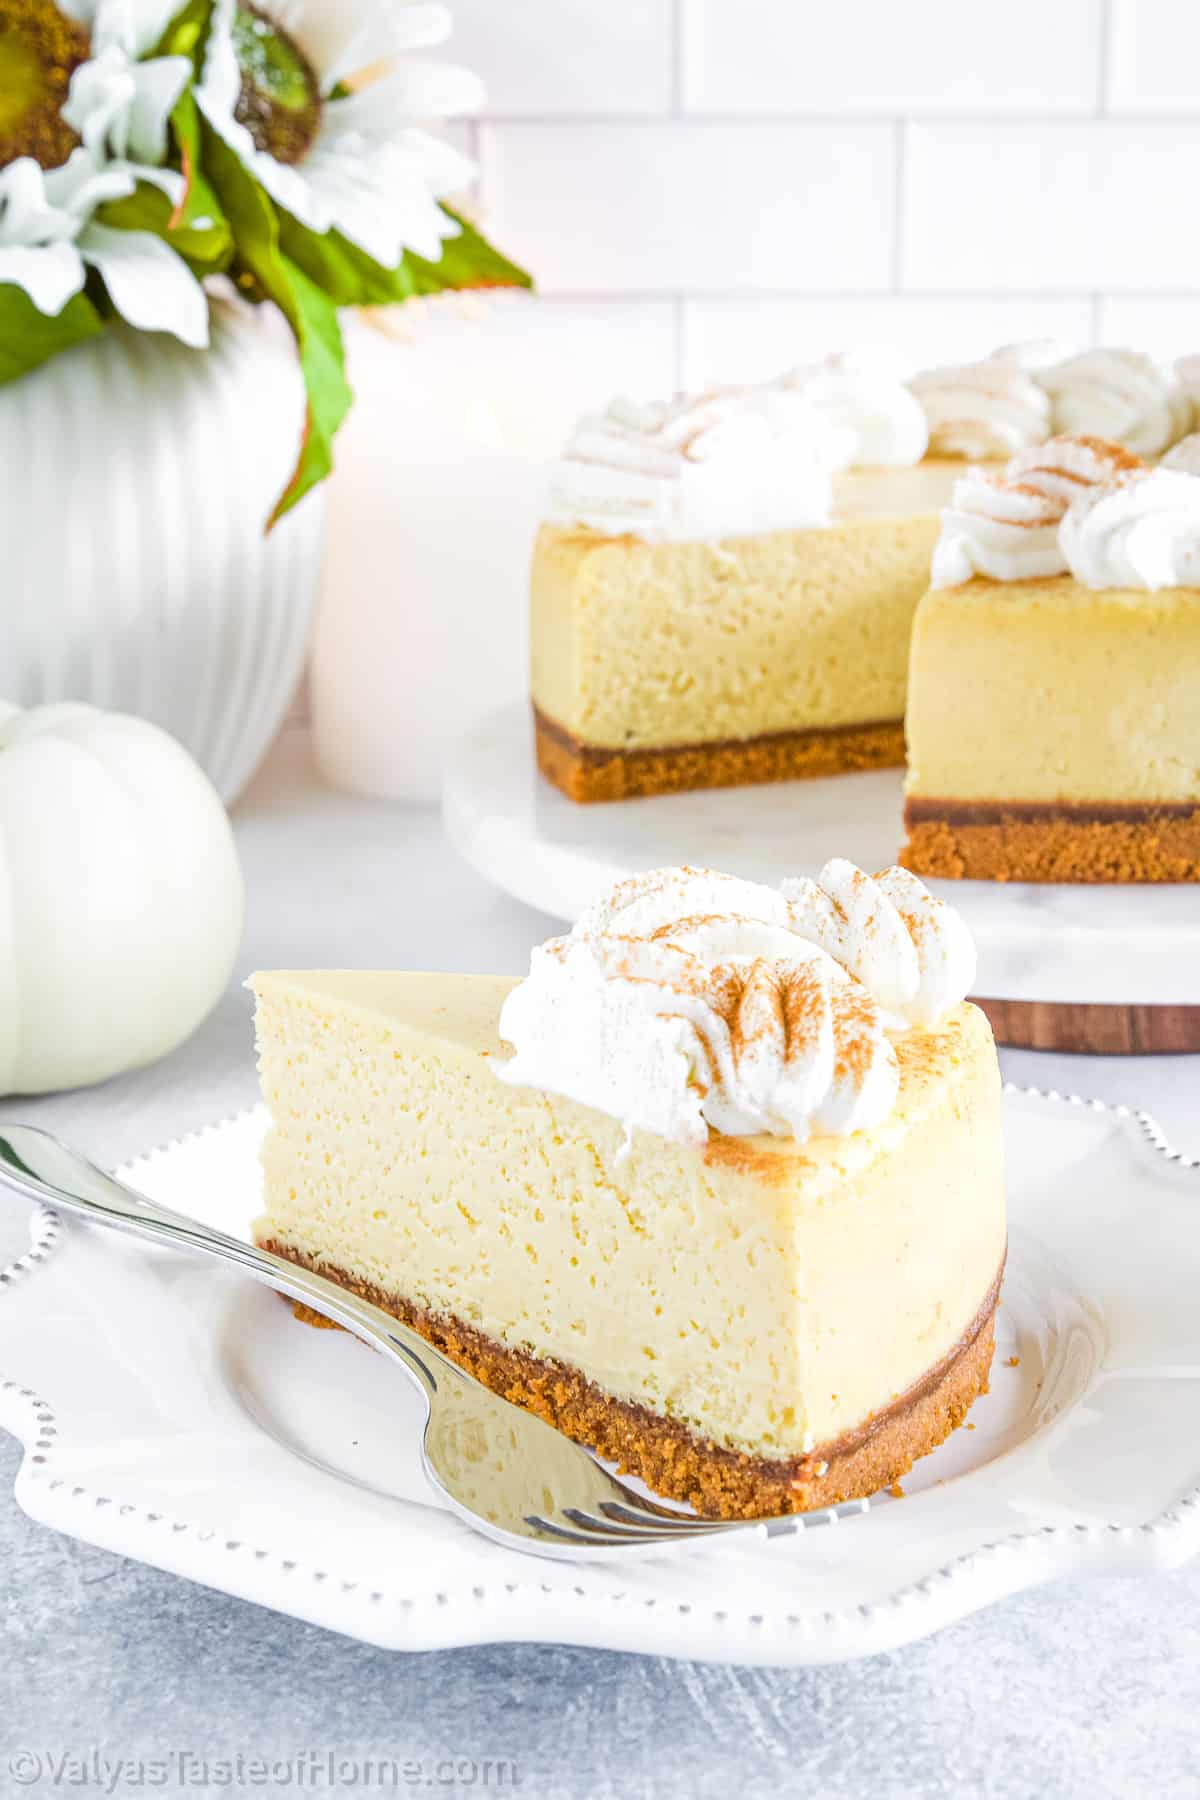 If you're a fan of sweet and creamy desserts, then this Pumpkin Pie Cheesecake recipe is certainly for you!